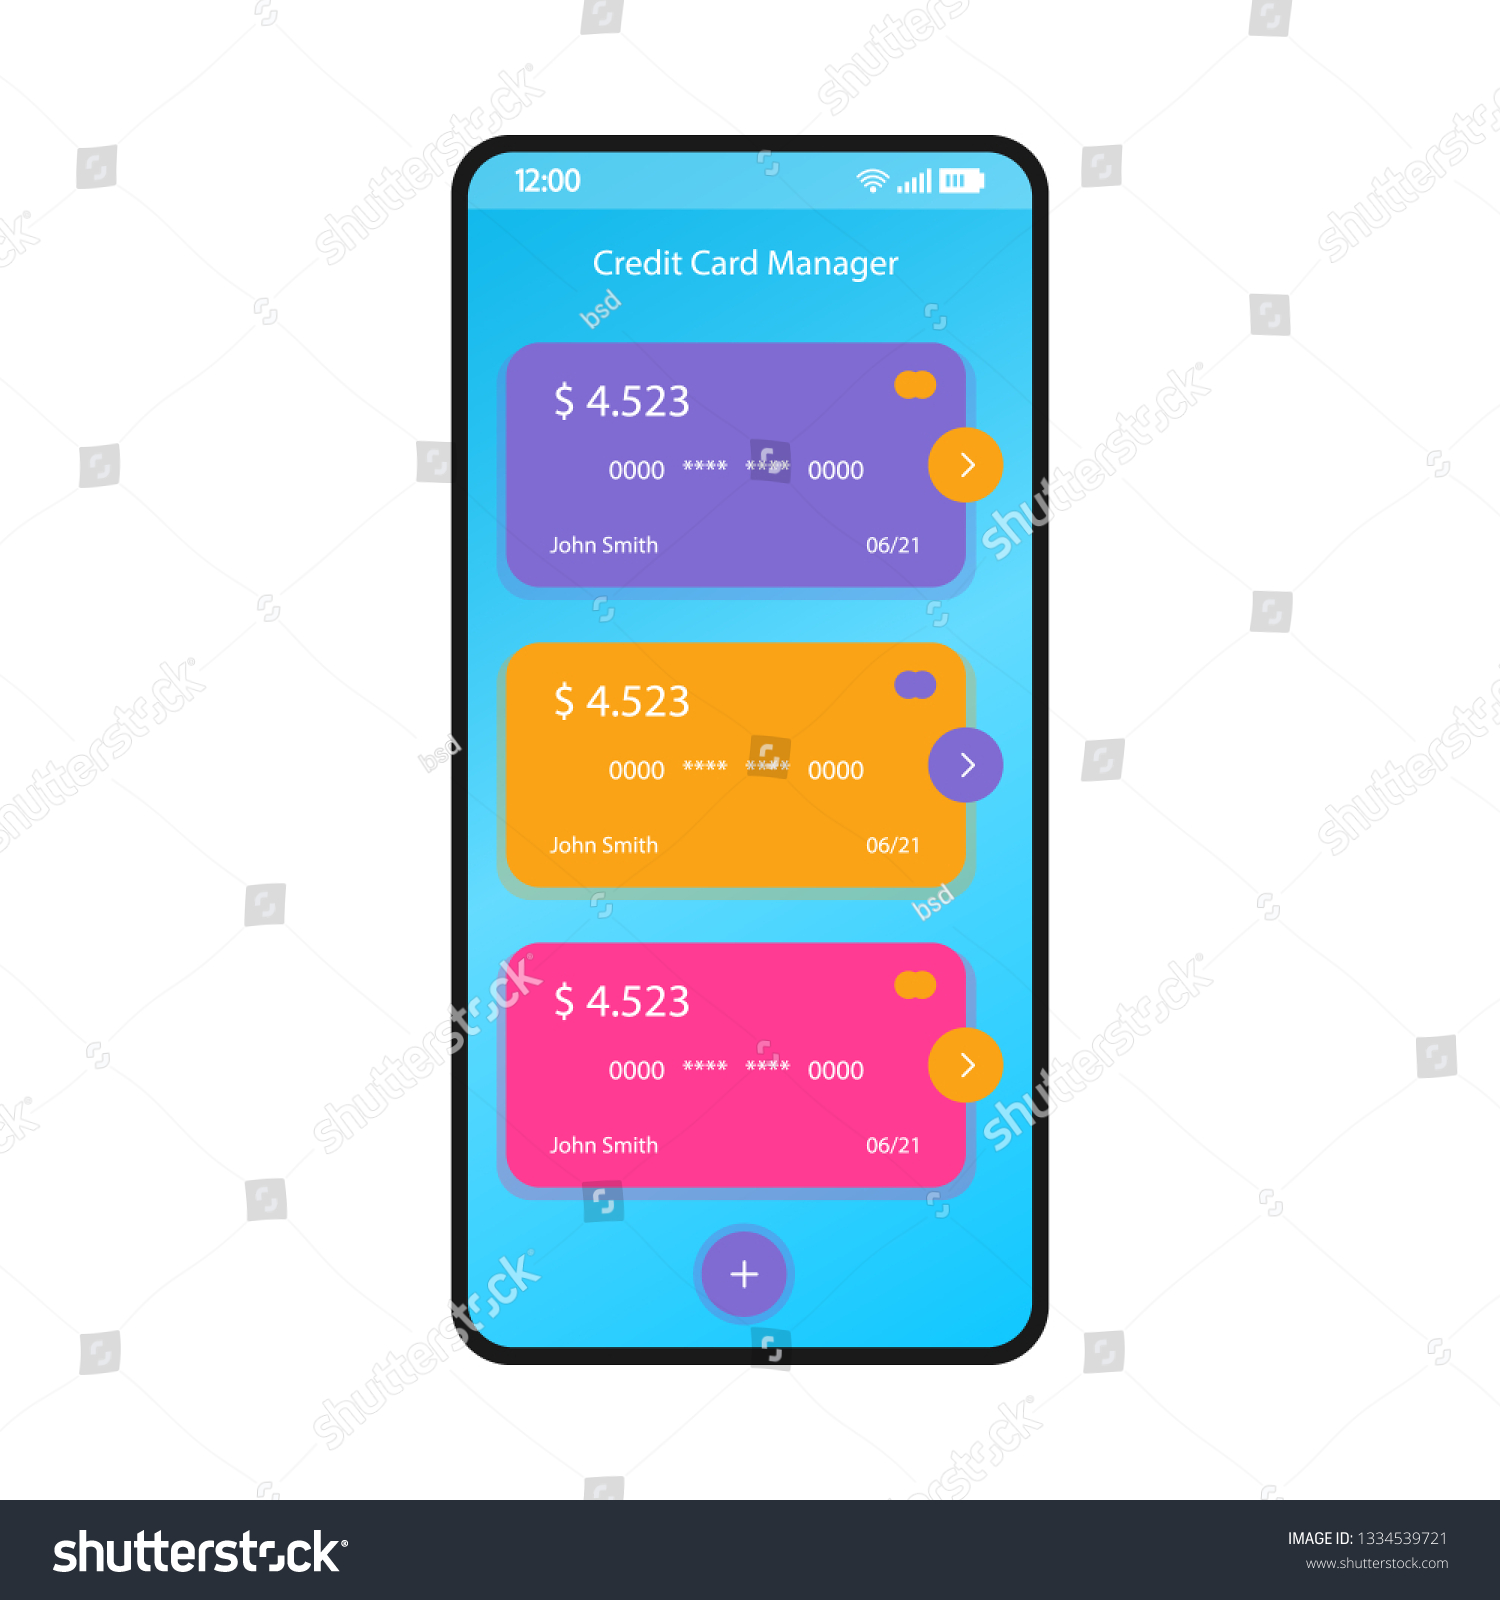 Credit Card Manager Smartphone Interface Vector Stock Vector Royalty Free 1334539721